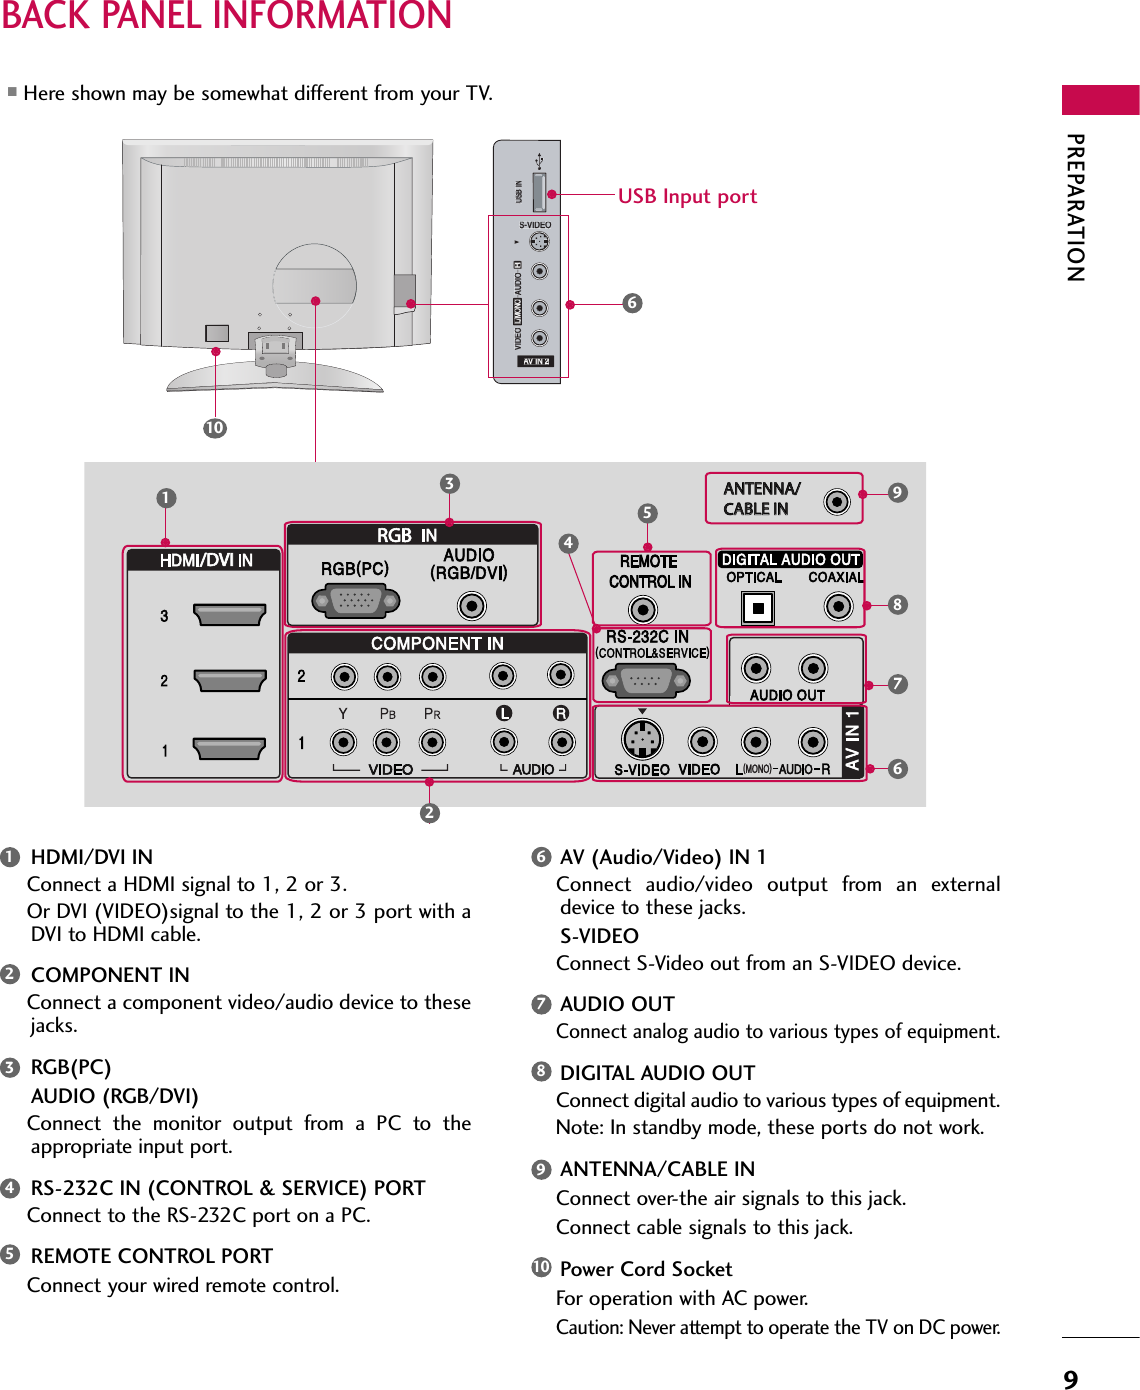 PREPARATIONBACK PANEL INFORMATION9■Here shown may be somewhat different from your TV.AV IN 2L/MONORAUDIOAVIDEOS-VIDEOUSB INUSB Input port10AV IN 2L/MONORAUDIOVIDEOS-VIDEOUSB INRGB/DVI ANTENNA/ANTENNA/CABLE INABLE IN132459876HDMI/DVI INConnect a HDMI signal to 1, 2 or 3.Or DVI (VIDEO)signal to the 1, 2 or 3 port with aDVI to HDMI cable.COMPONENT INConnect a component video/audio device to thesejacks.RGB(PC)AUDIO (RGB/DVI)Connect  the  monitor  output  from  a  PC  to  theappropriate input port.RS-232C IN (CONTROL &amp; SERVICE) PORTConnect to the RS-232C port on a PC.REMOTE CONTROL PORTConnect your wired remote control.AV (Audio/Video) IN 1 Connect  audio/video  output  from  an  externaldevice to these jacks.S-VIDEOConnect S-Video out from an S-VIDEO device.AUDIO OUTConnect analog audio to various types of equipment.DIGITAL AUDIO OUTConnect digital audio to various types of equipment. Note: In standby mode, these ports do not work.ANTENNA/CABLE INConnect over-the air signals to this jack.Connect cable signals to this jack.Power Cord SocketFor operation with AC power. Caution: Never attempt to operate the TV on DC power.176892345106